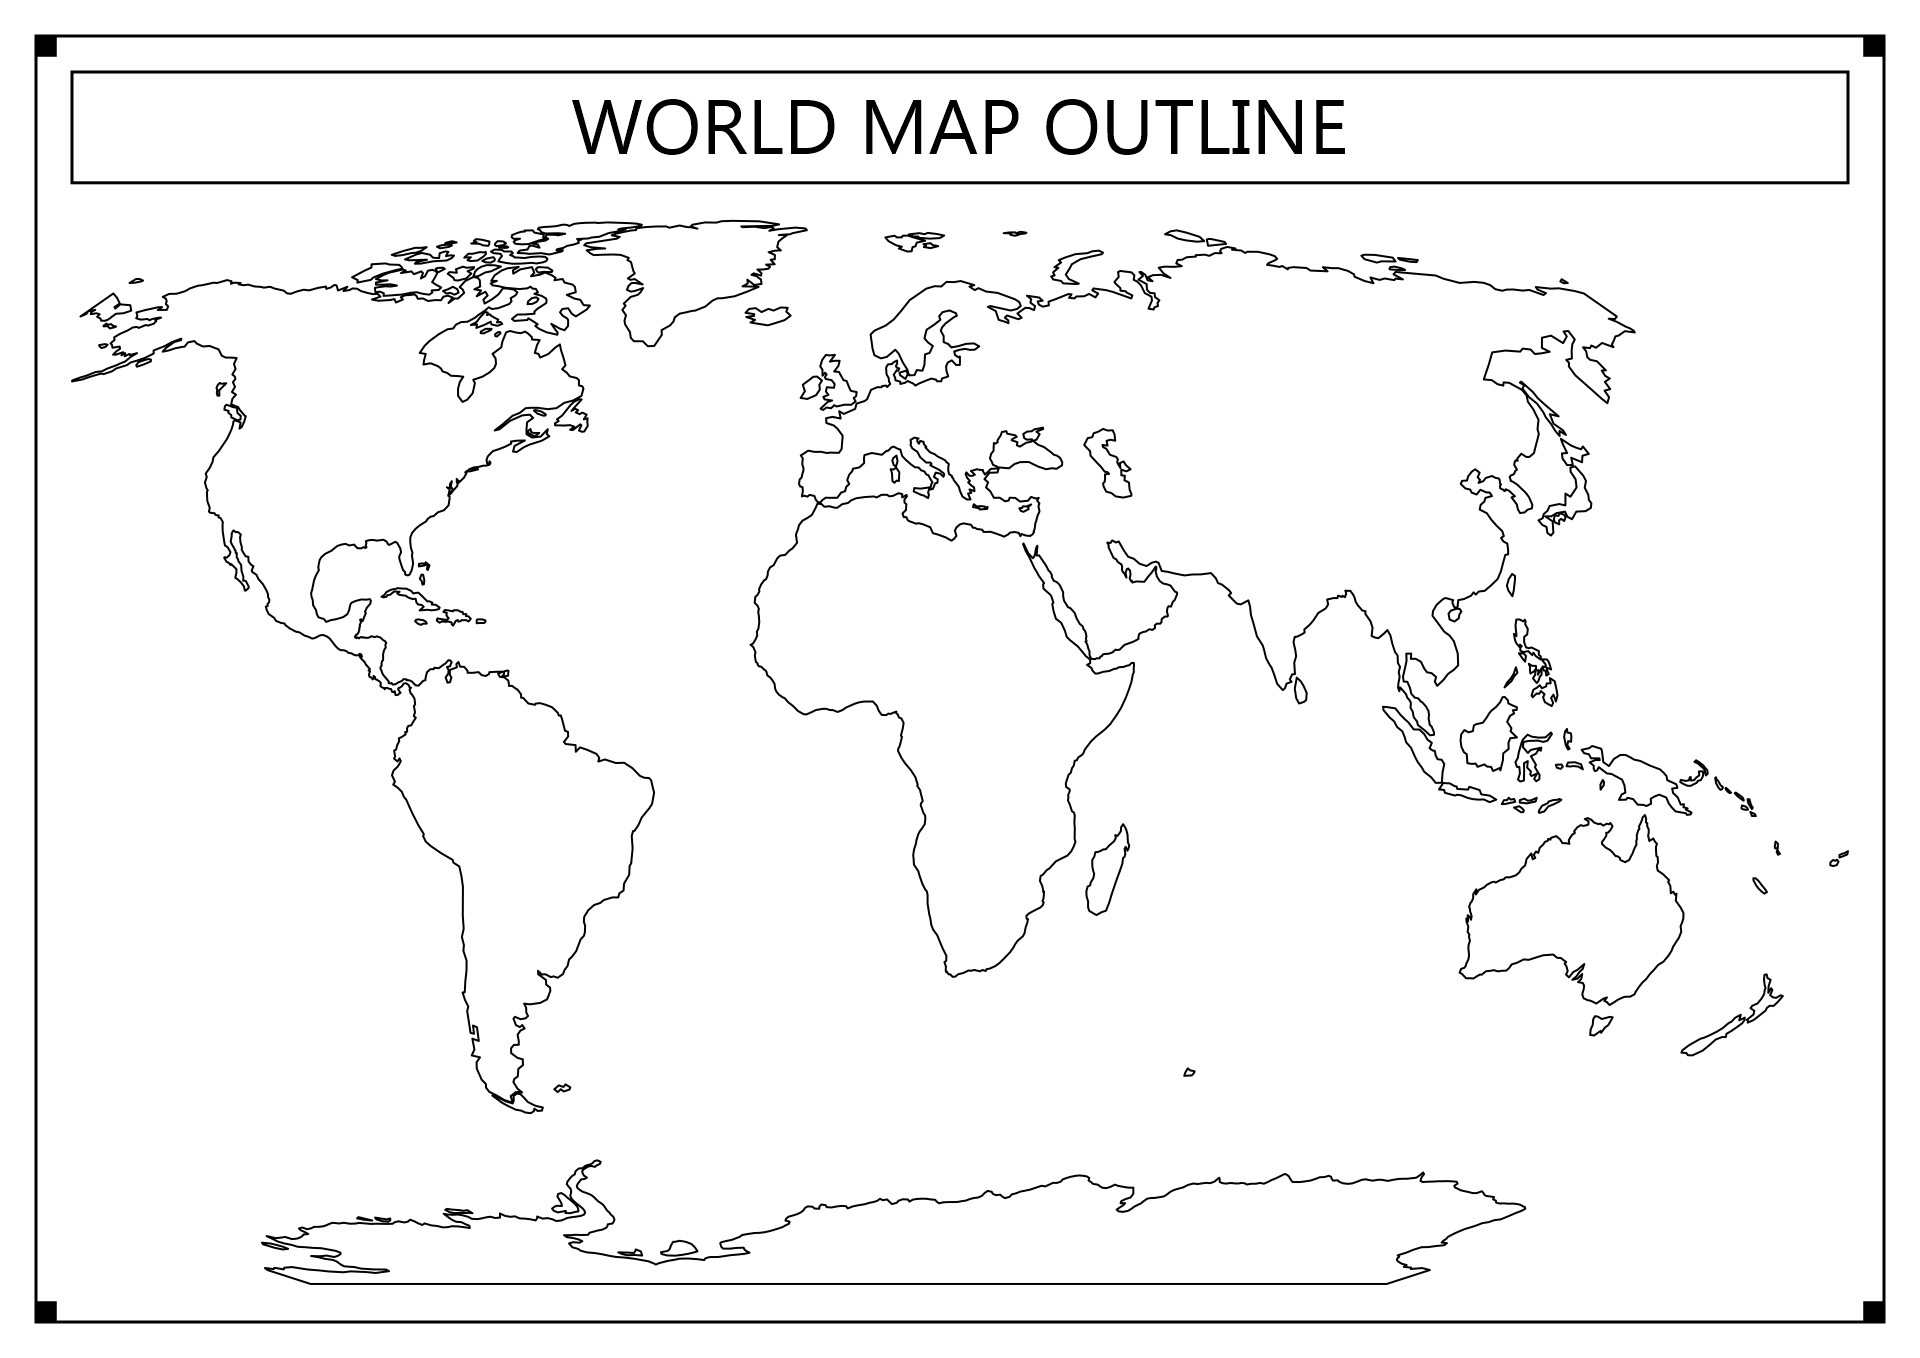 continents-map-without-labels